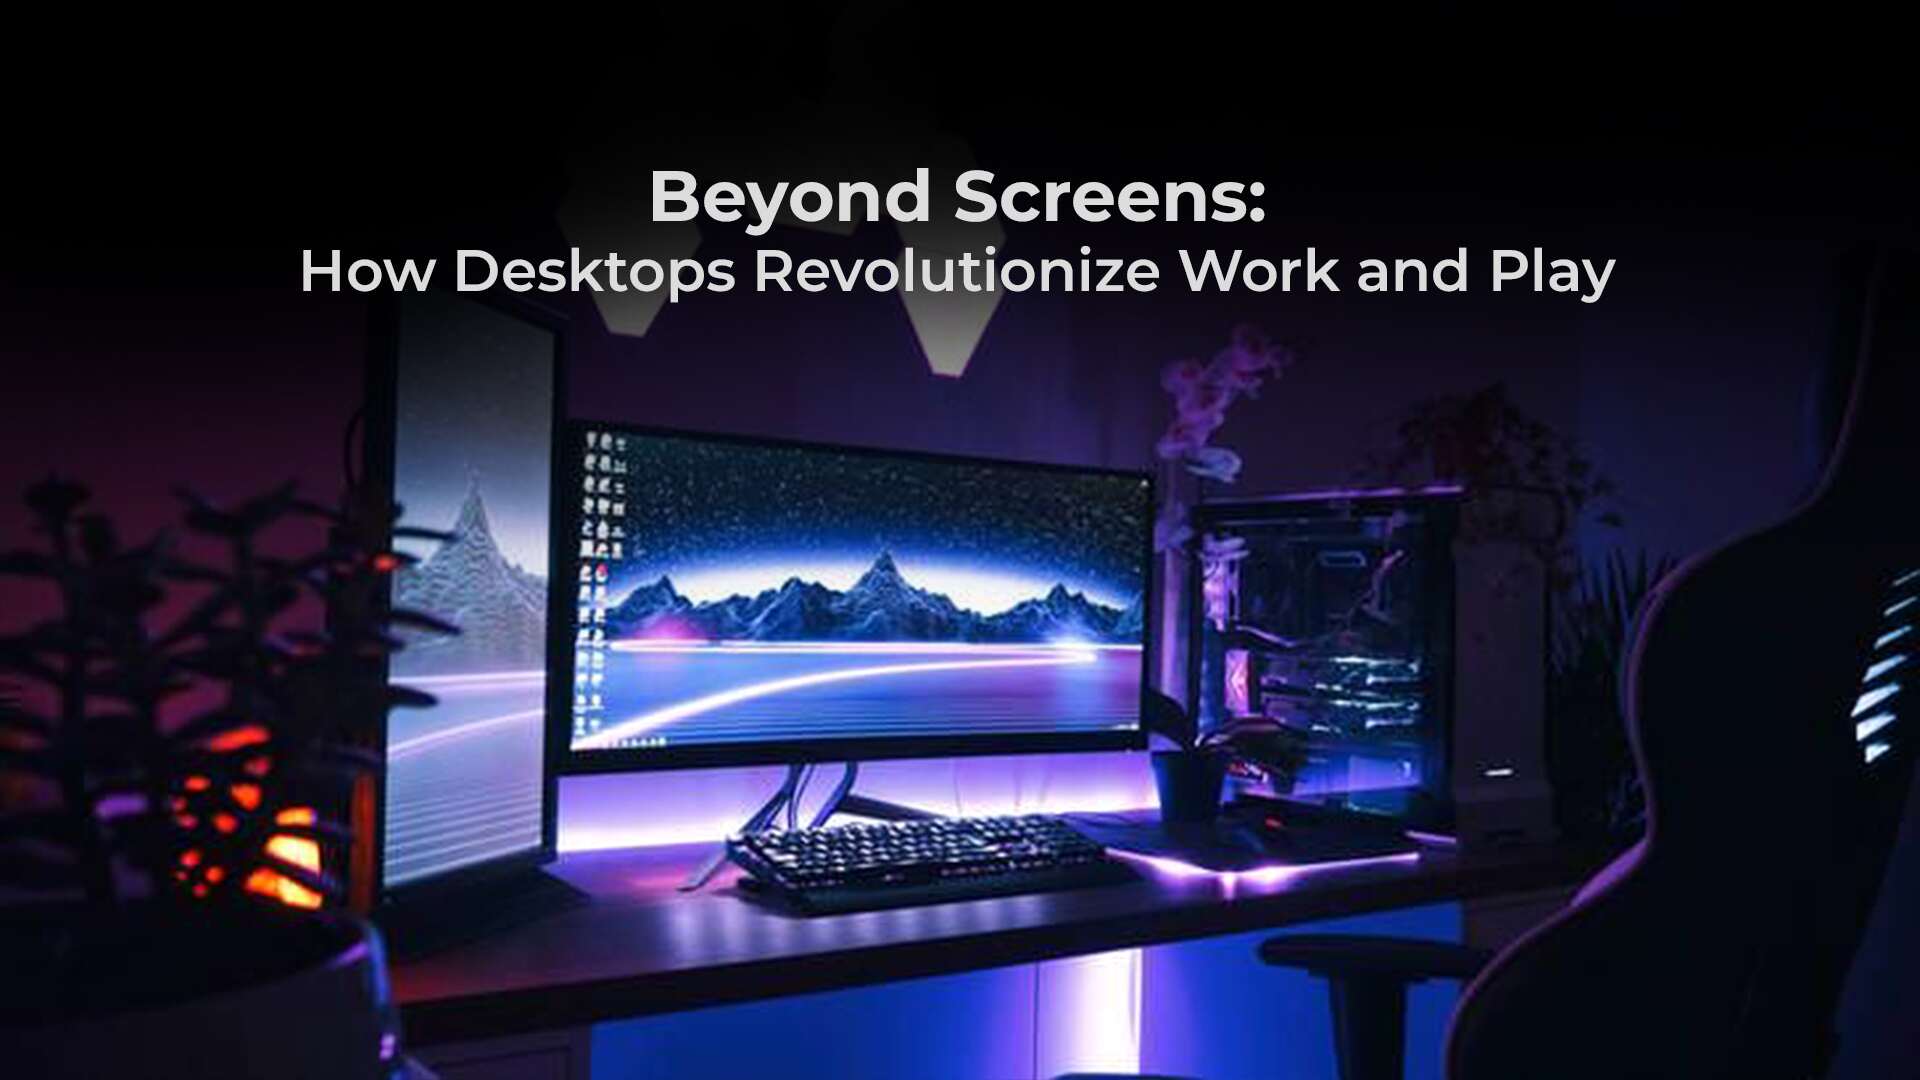 Step into a world where desktops are more than just screens – they're gateways to productivity and entertainment in 'Beyond Screens'